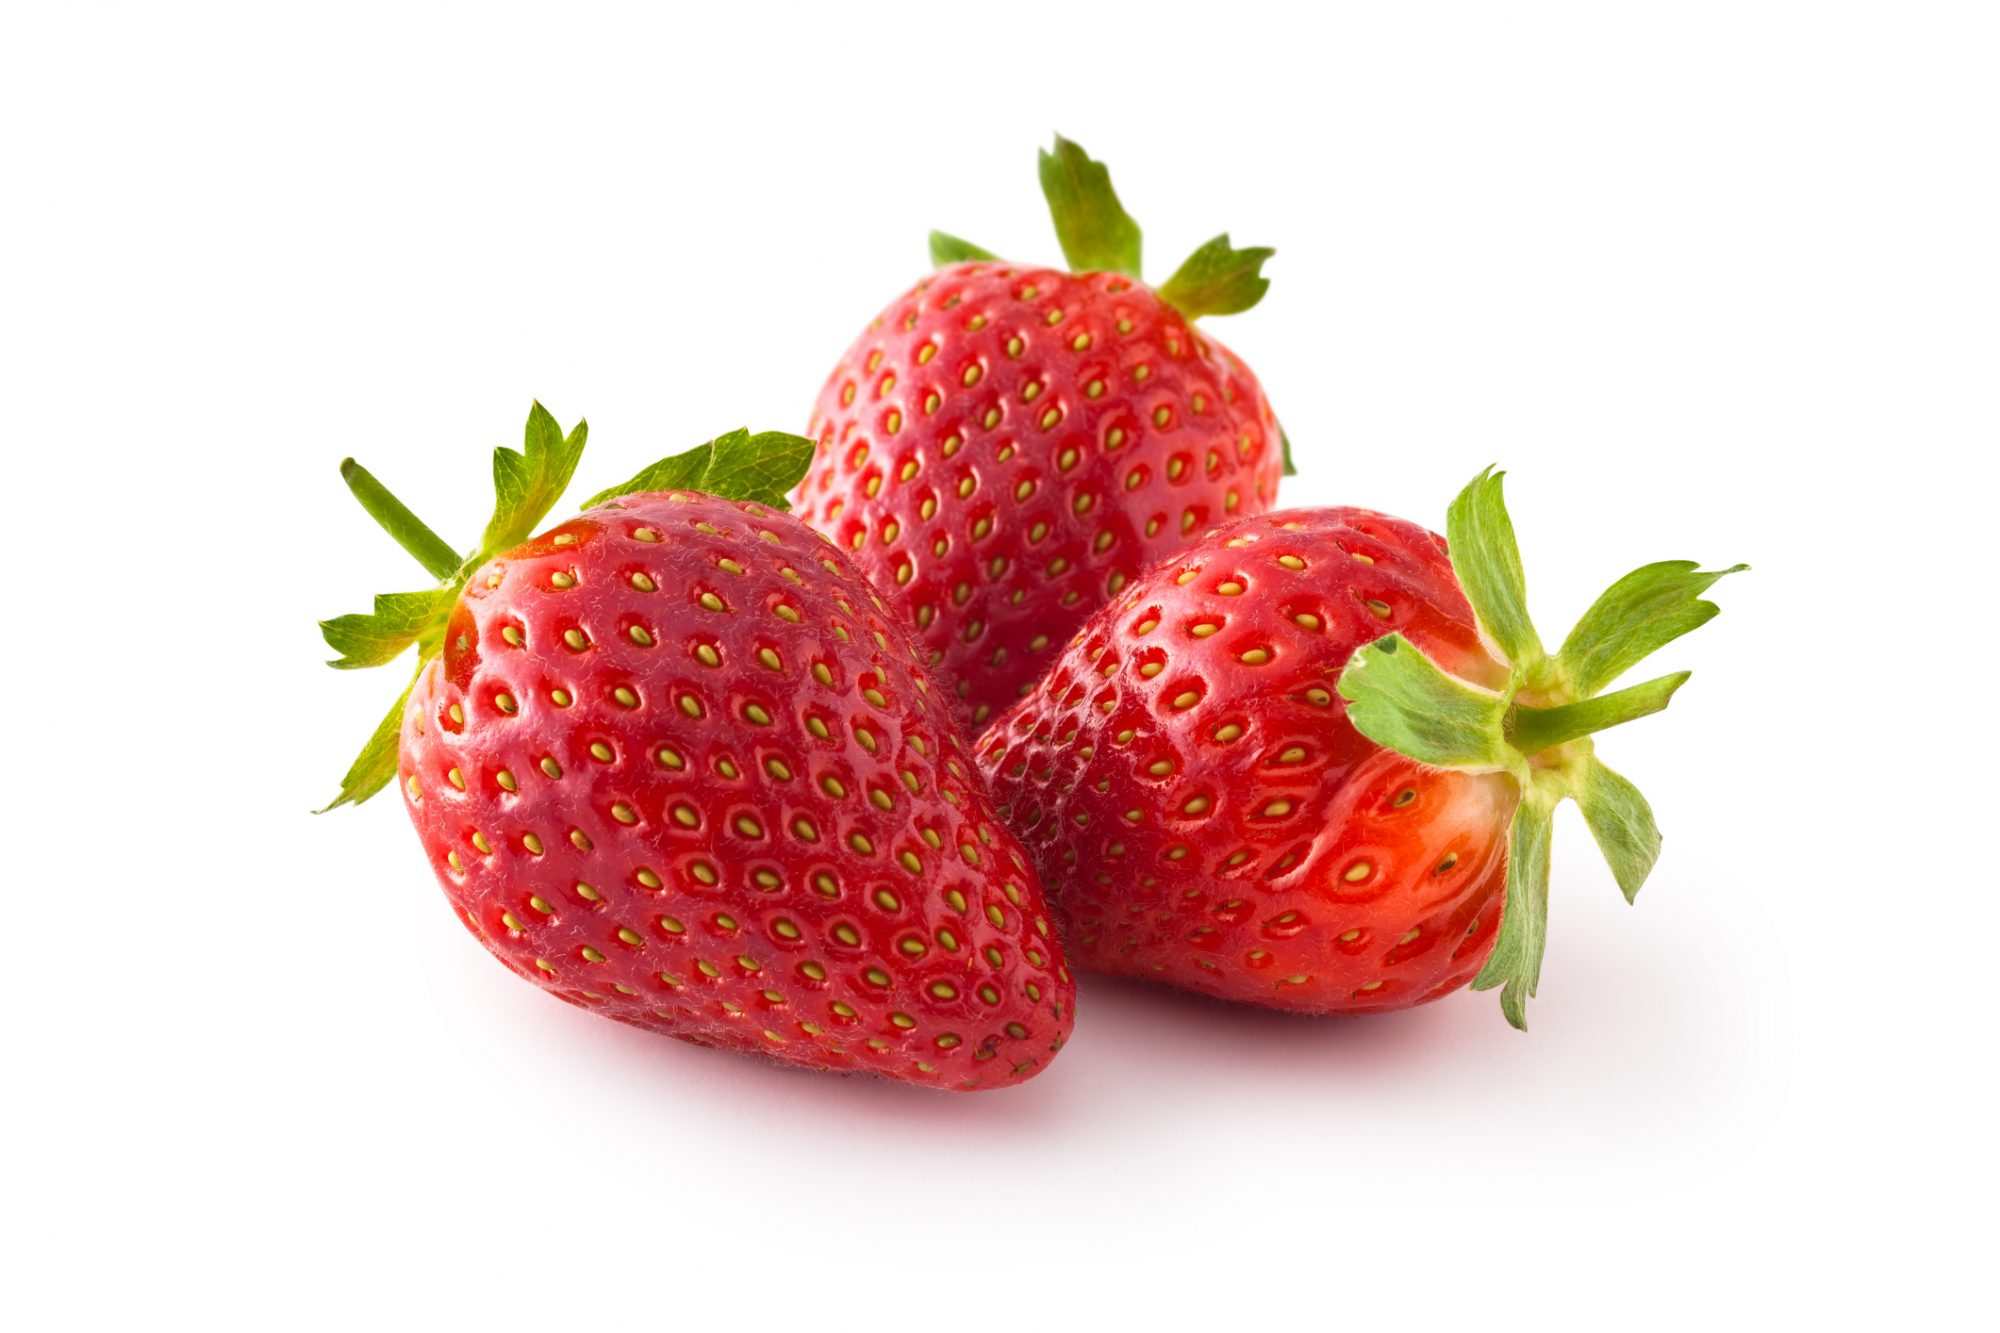 How to Buy, Store, and Cook Fresh Strawberries